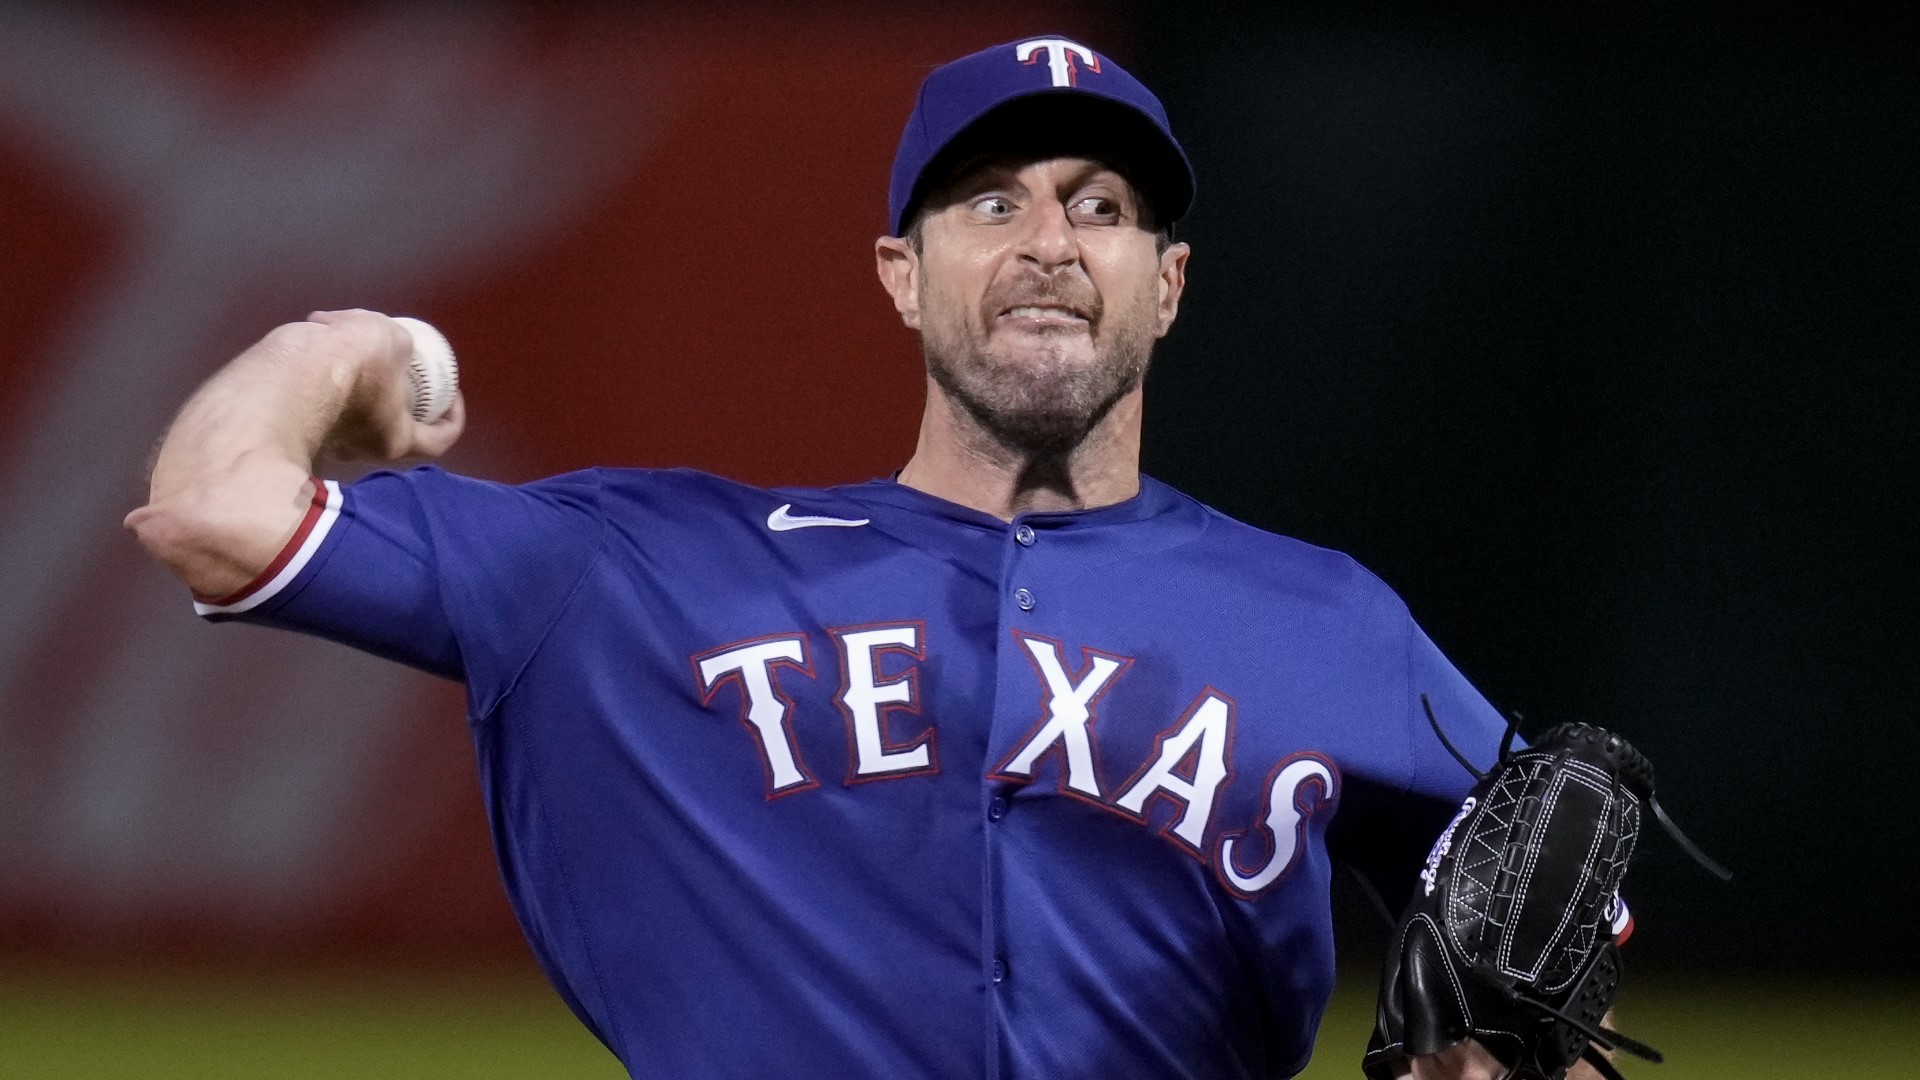 Texas Rangers starting pitcher Max Scherzer locked down the Oakland Athletics in a 6-1 win Wednesday night. He also had a beef with the umpire.